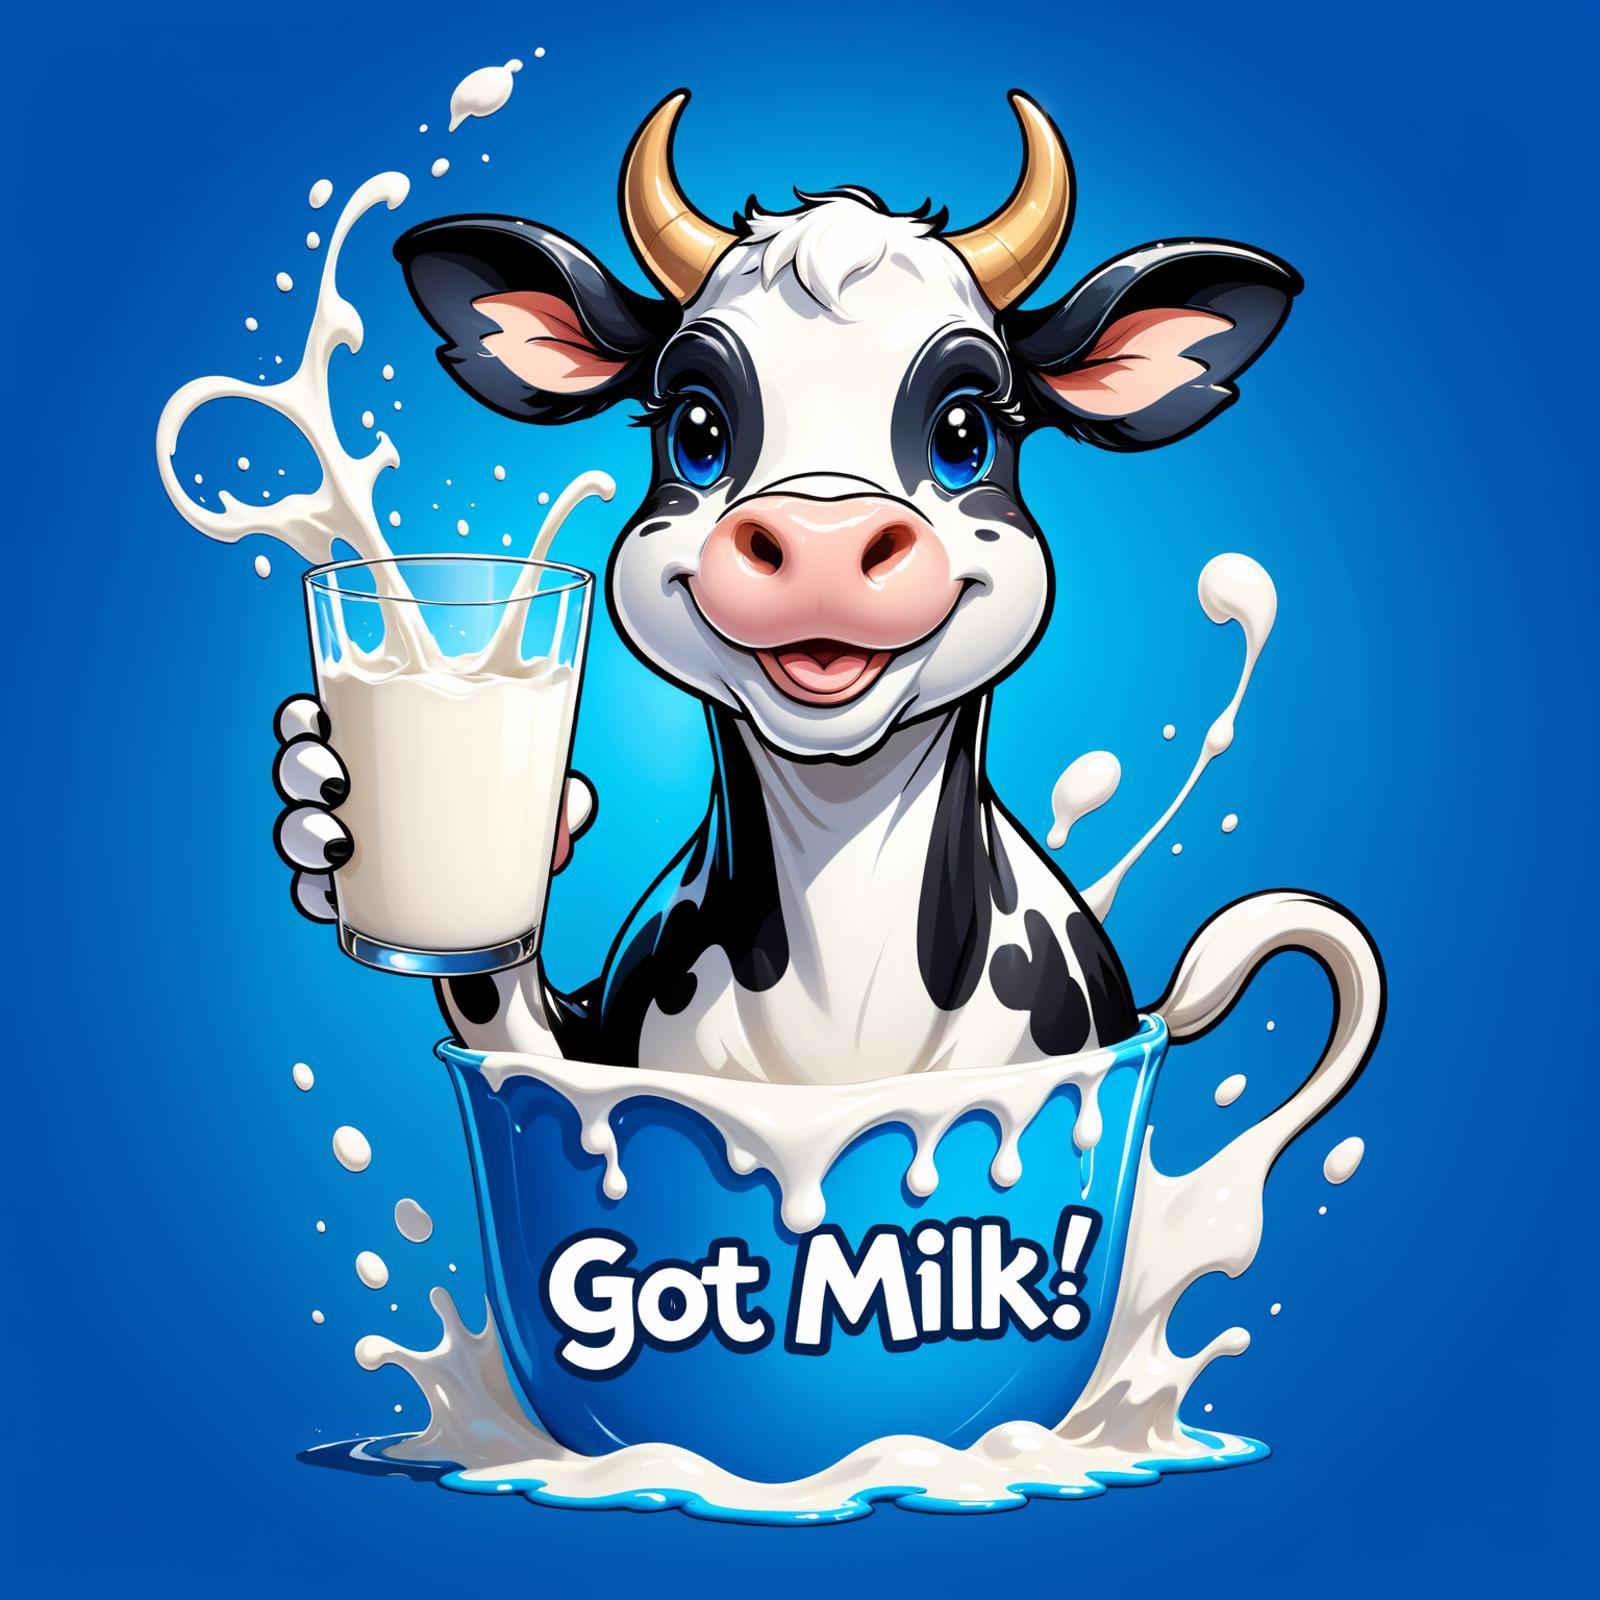 A cartoon cow with the words "got milk?" holding a glass of milk.